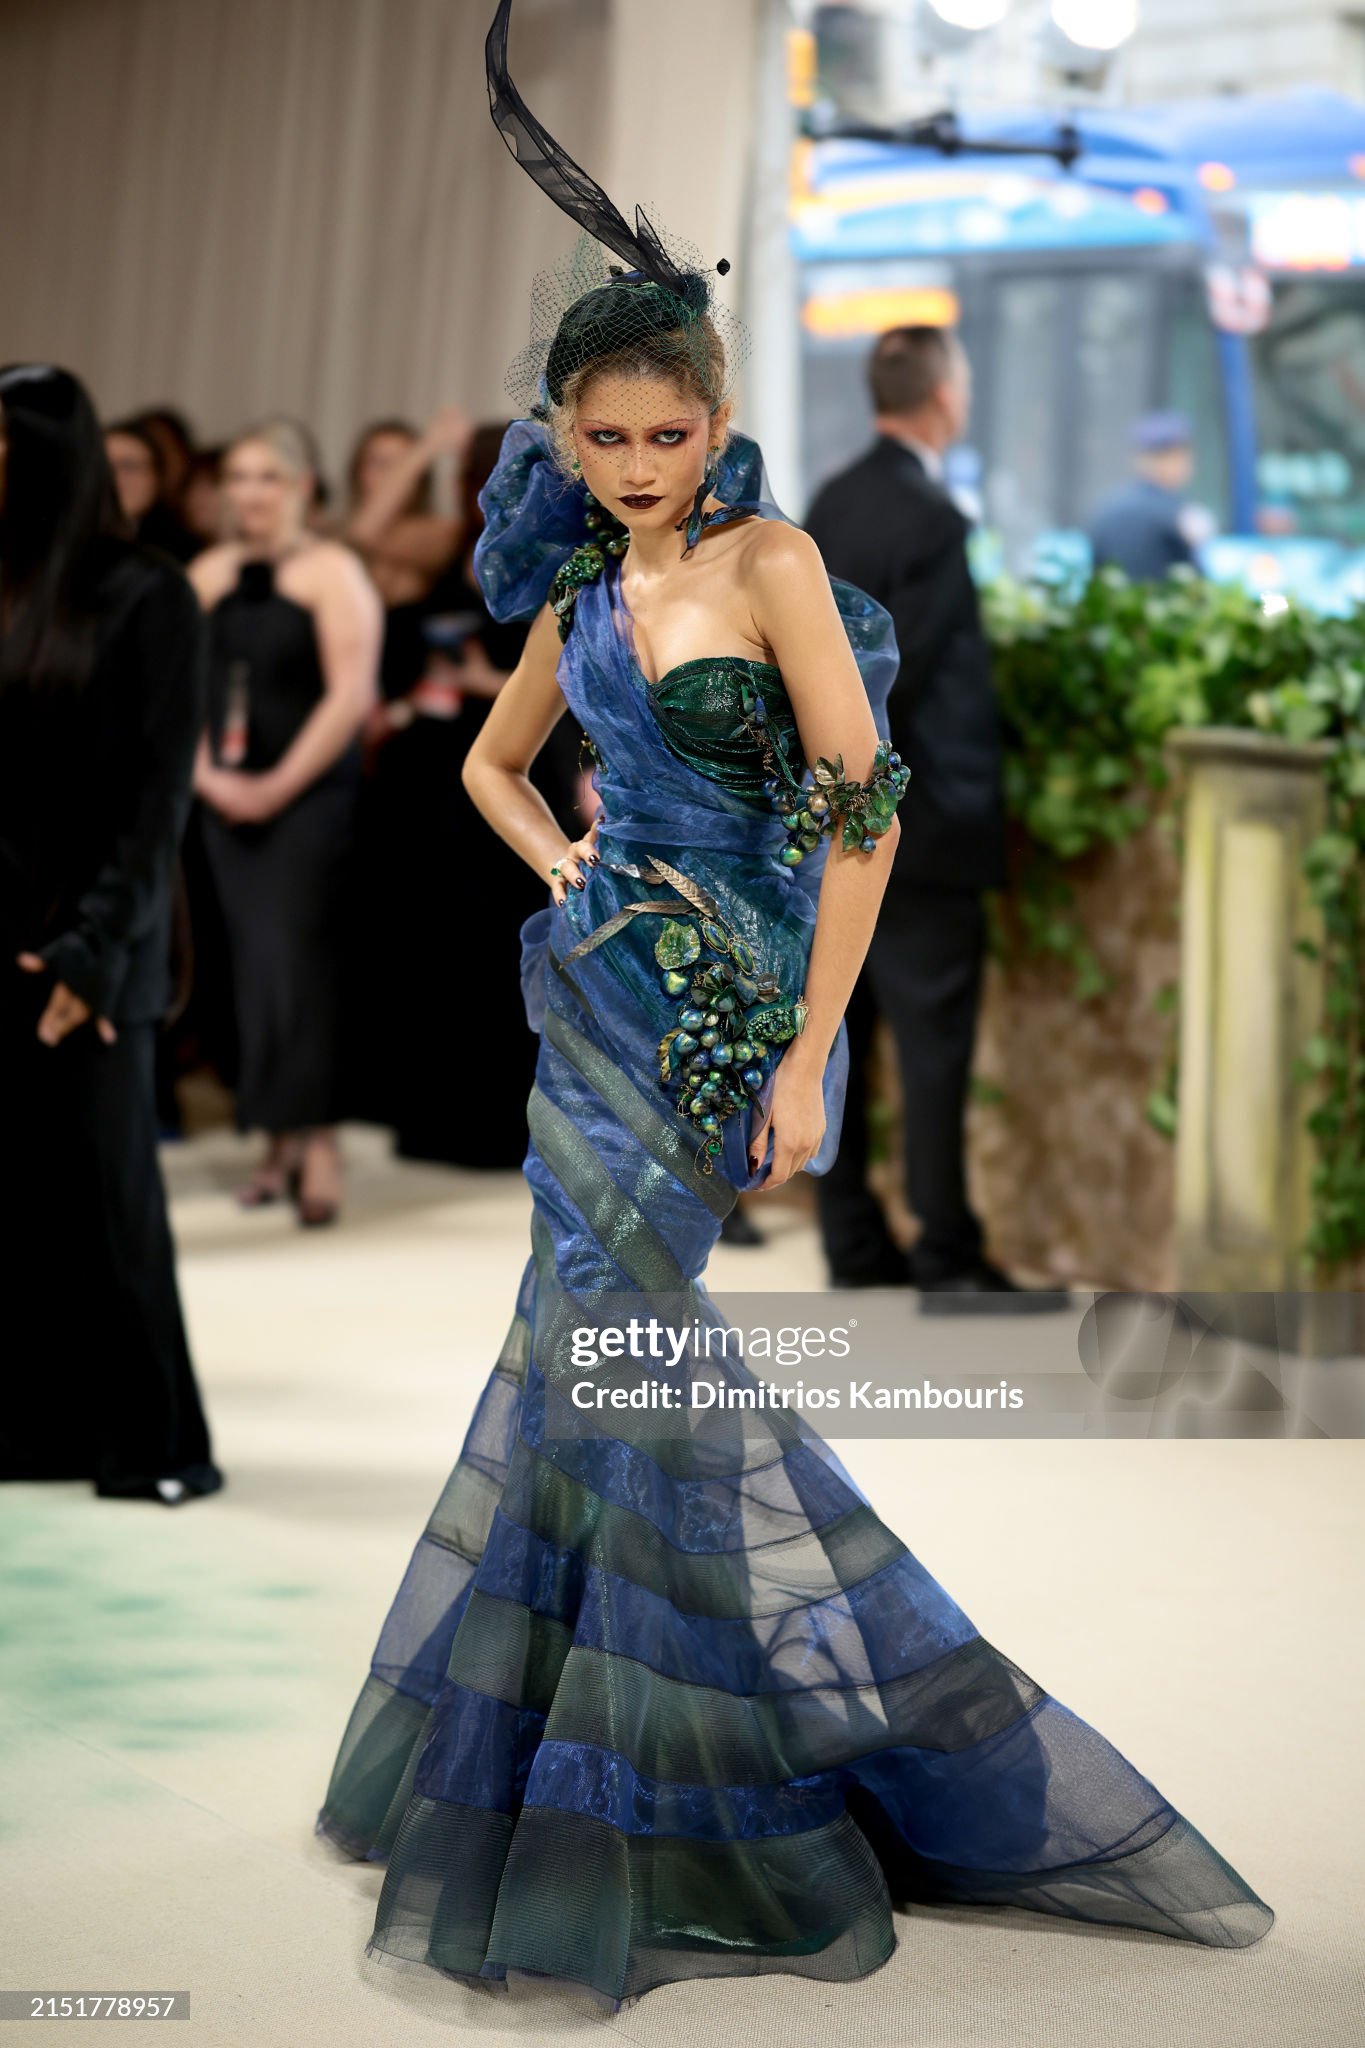 gettyimages-2151778957-2048x2048.jpg